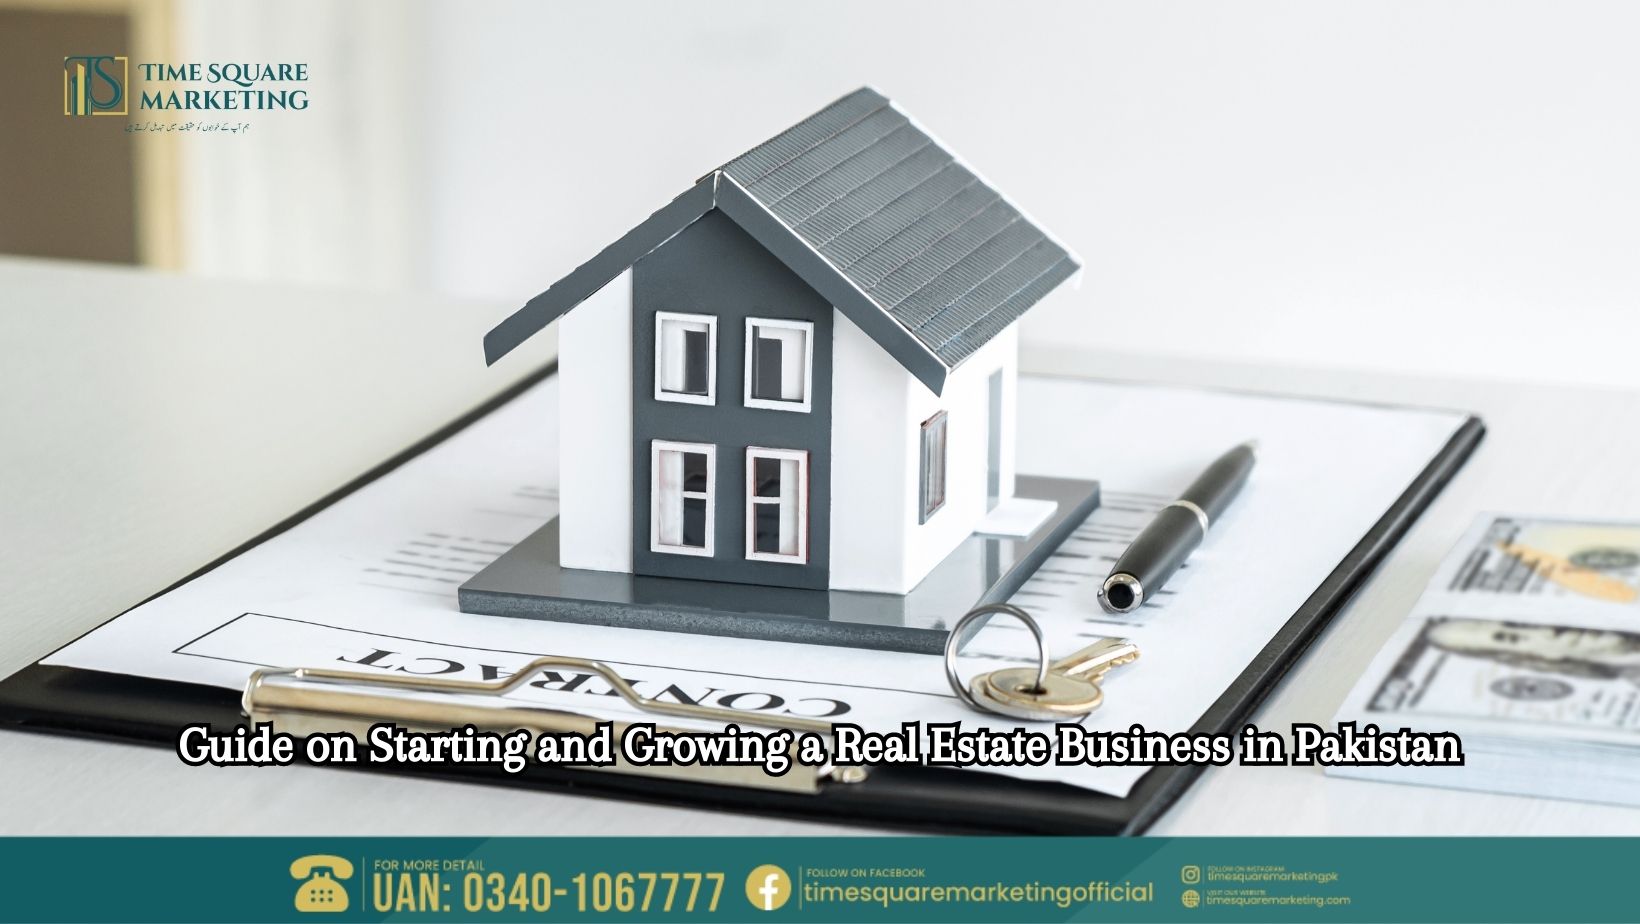 Guide on Starting and Growing a Real Estate Business in Pakistan